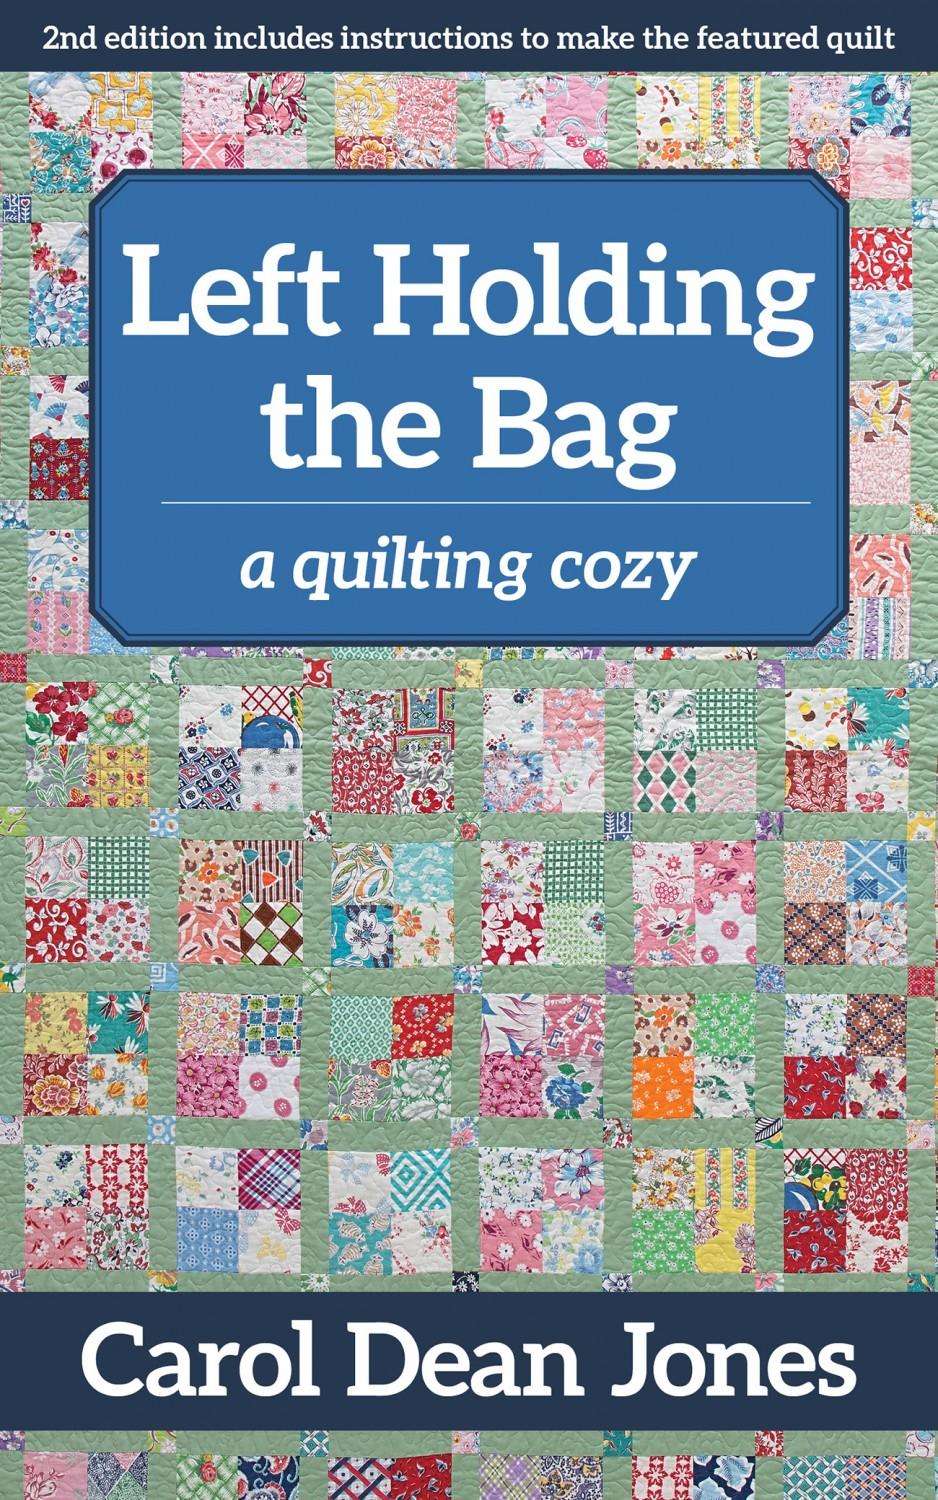 Left Holding the Bag A Quliting Cozy